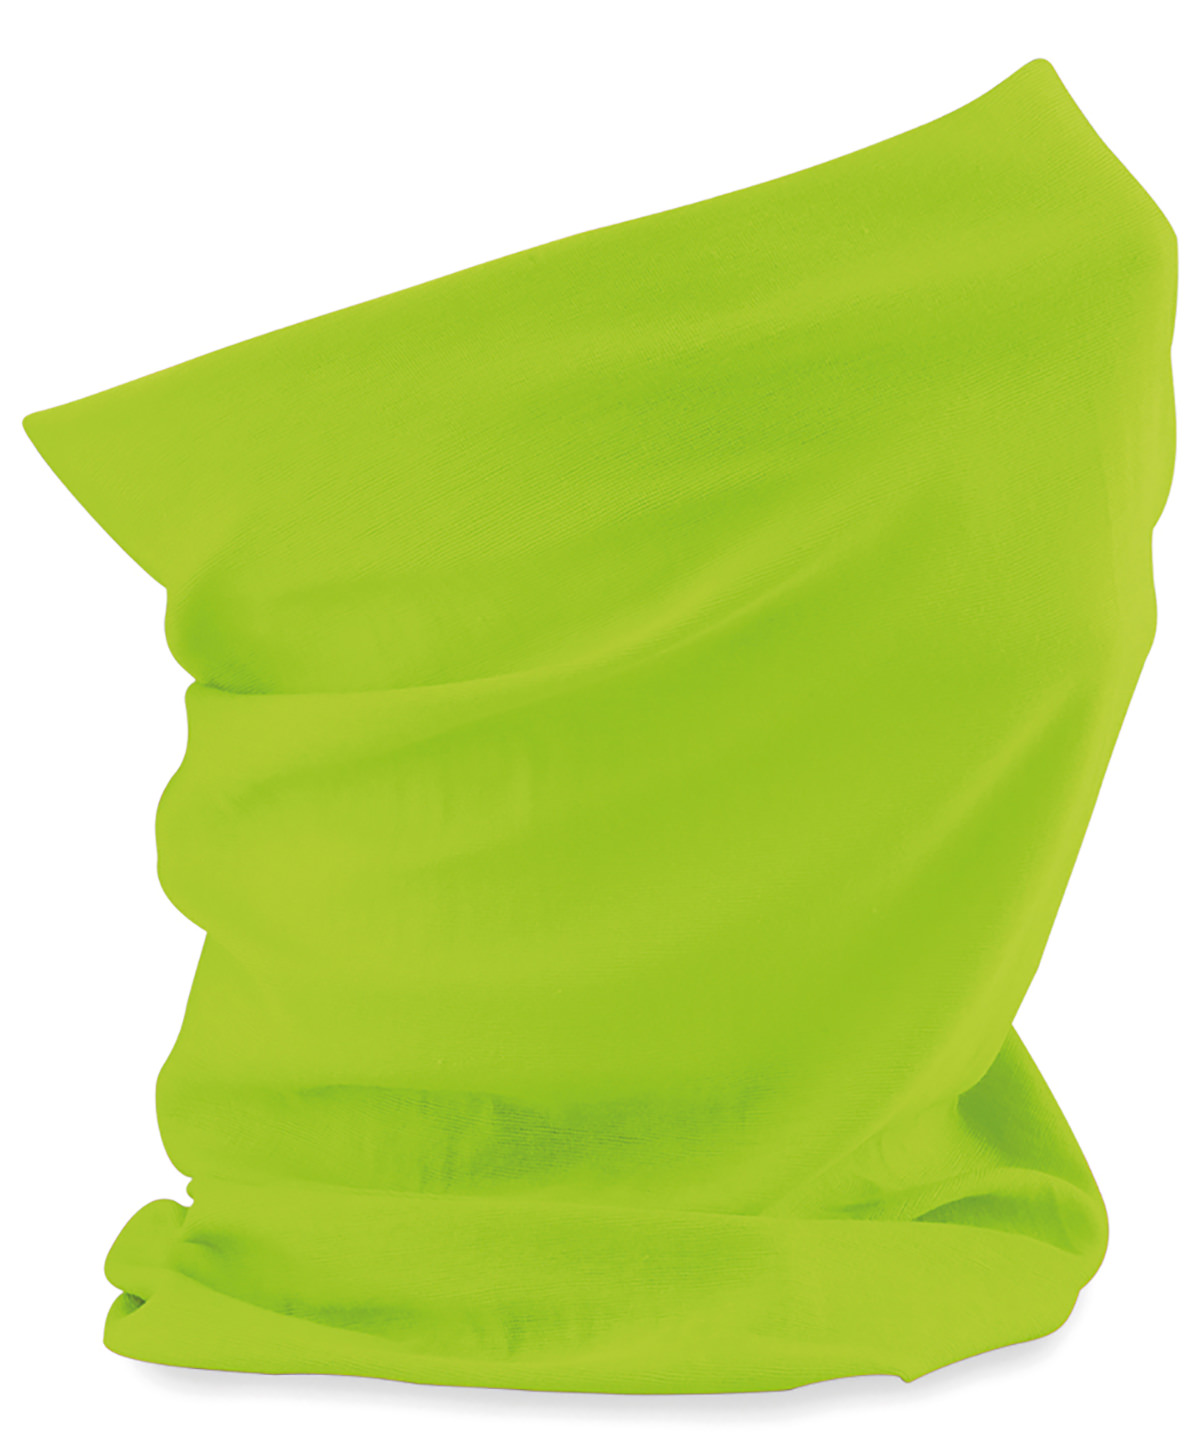 Junior Morf Original Lime Green Size One Size